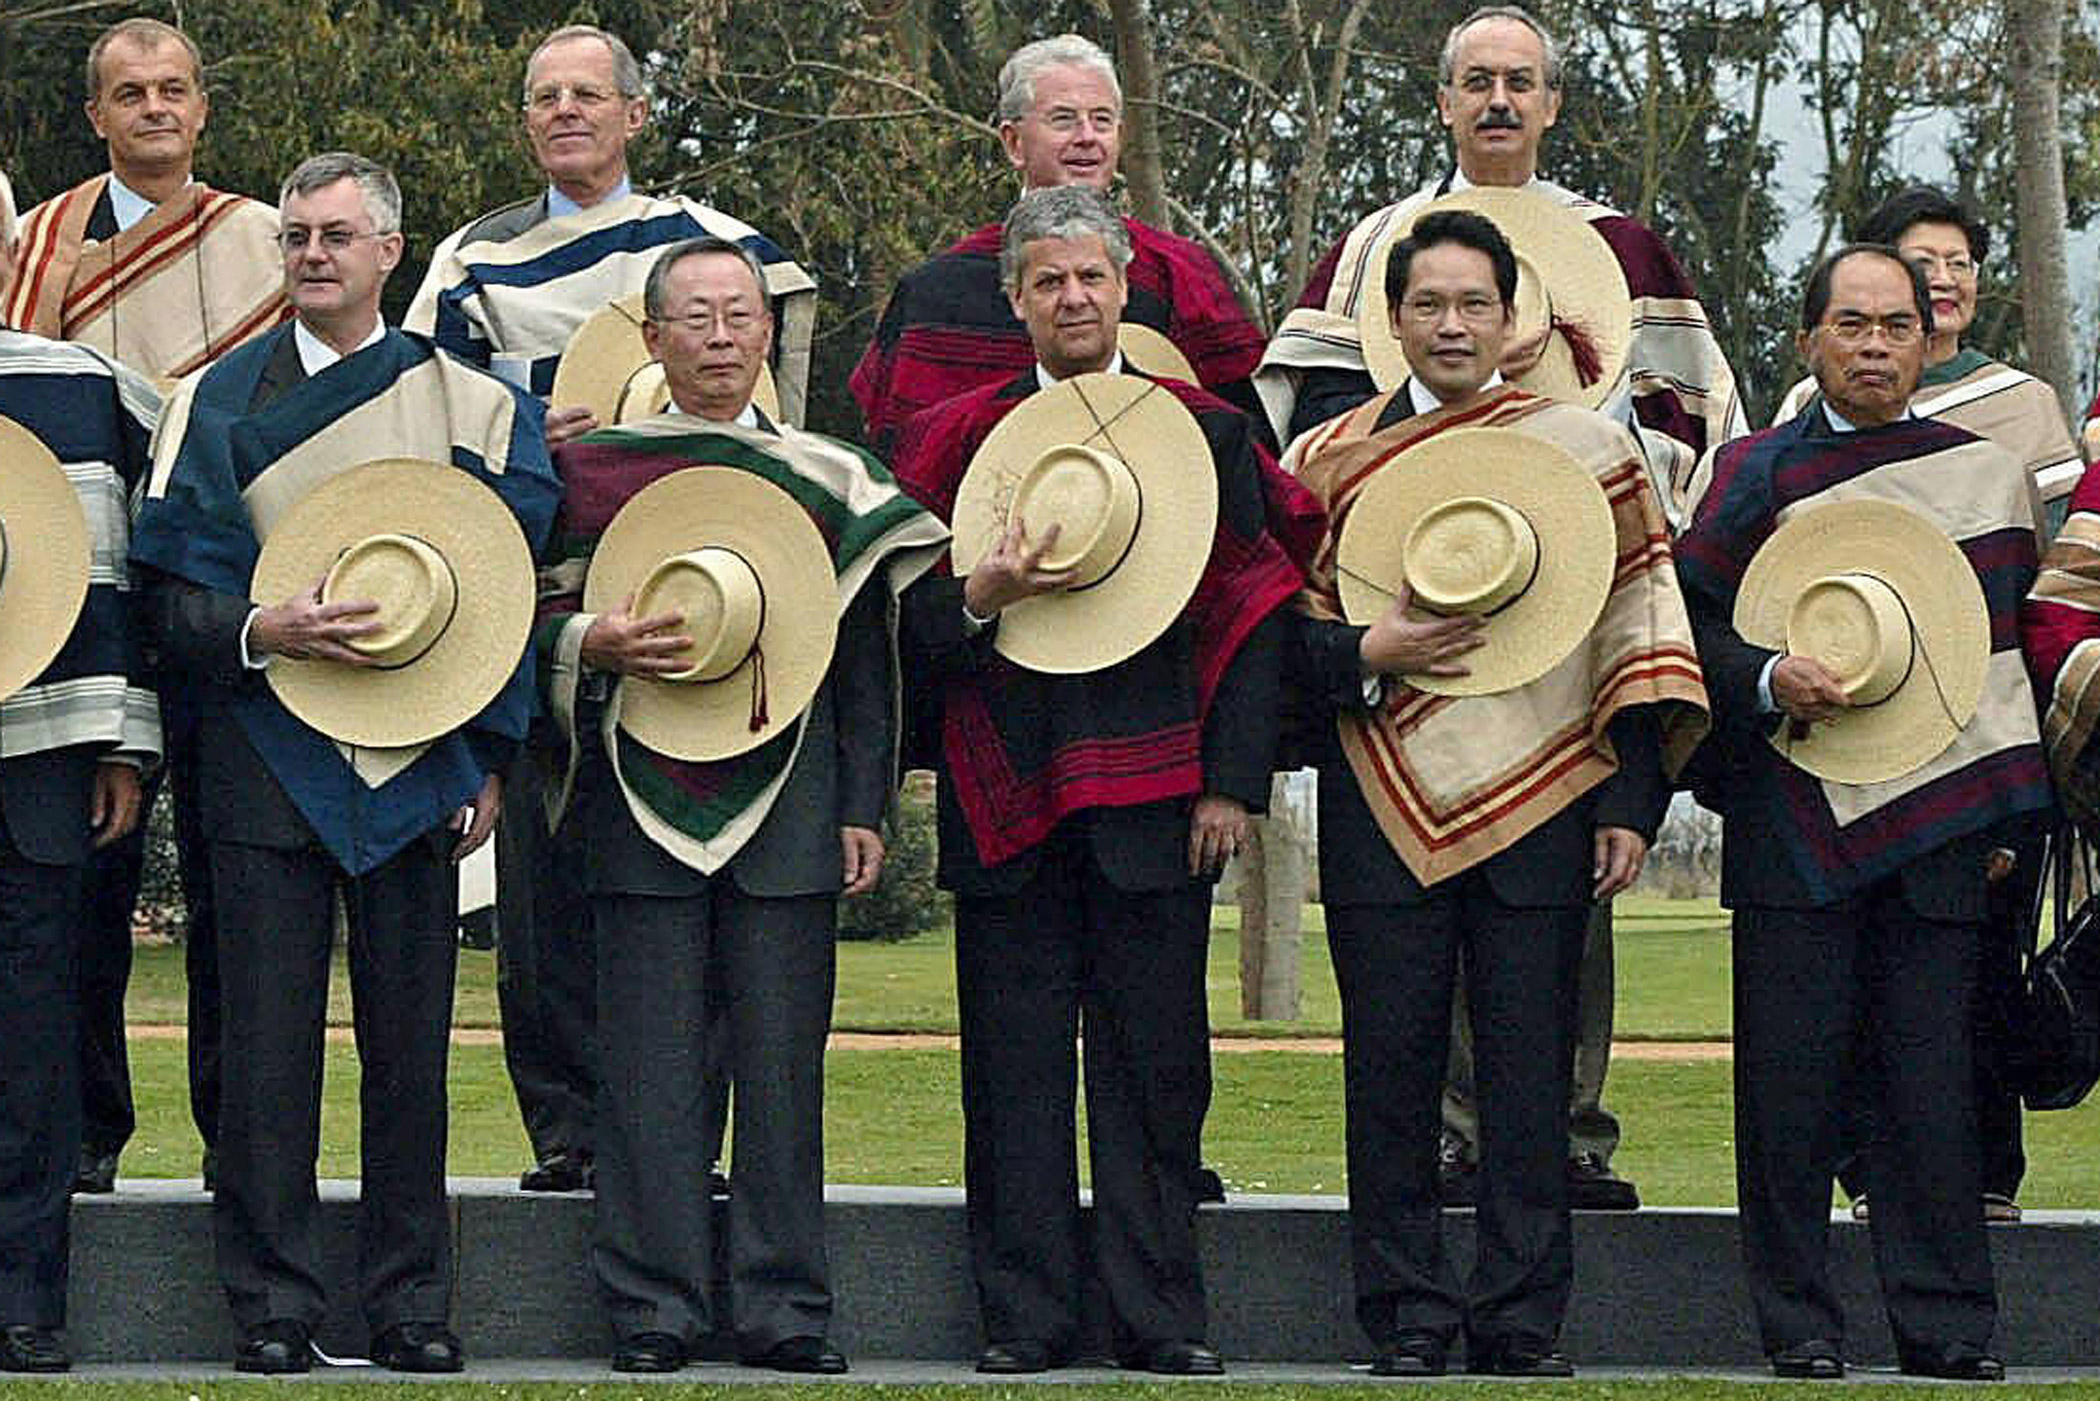 Ministers and delegates of the 11th APEC Summit pose for a photo wearing local garb in Santiago on Sept. 3, 2004.